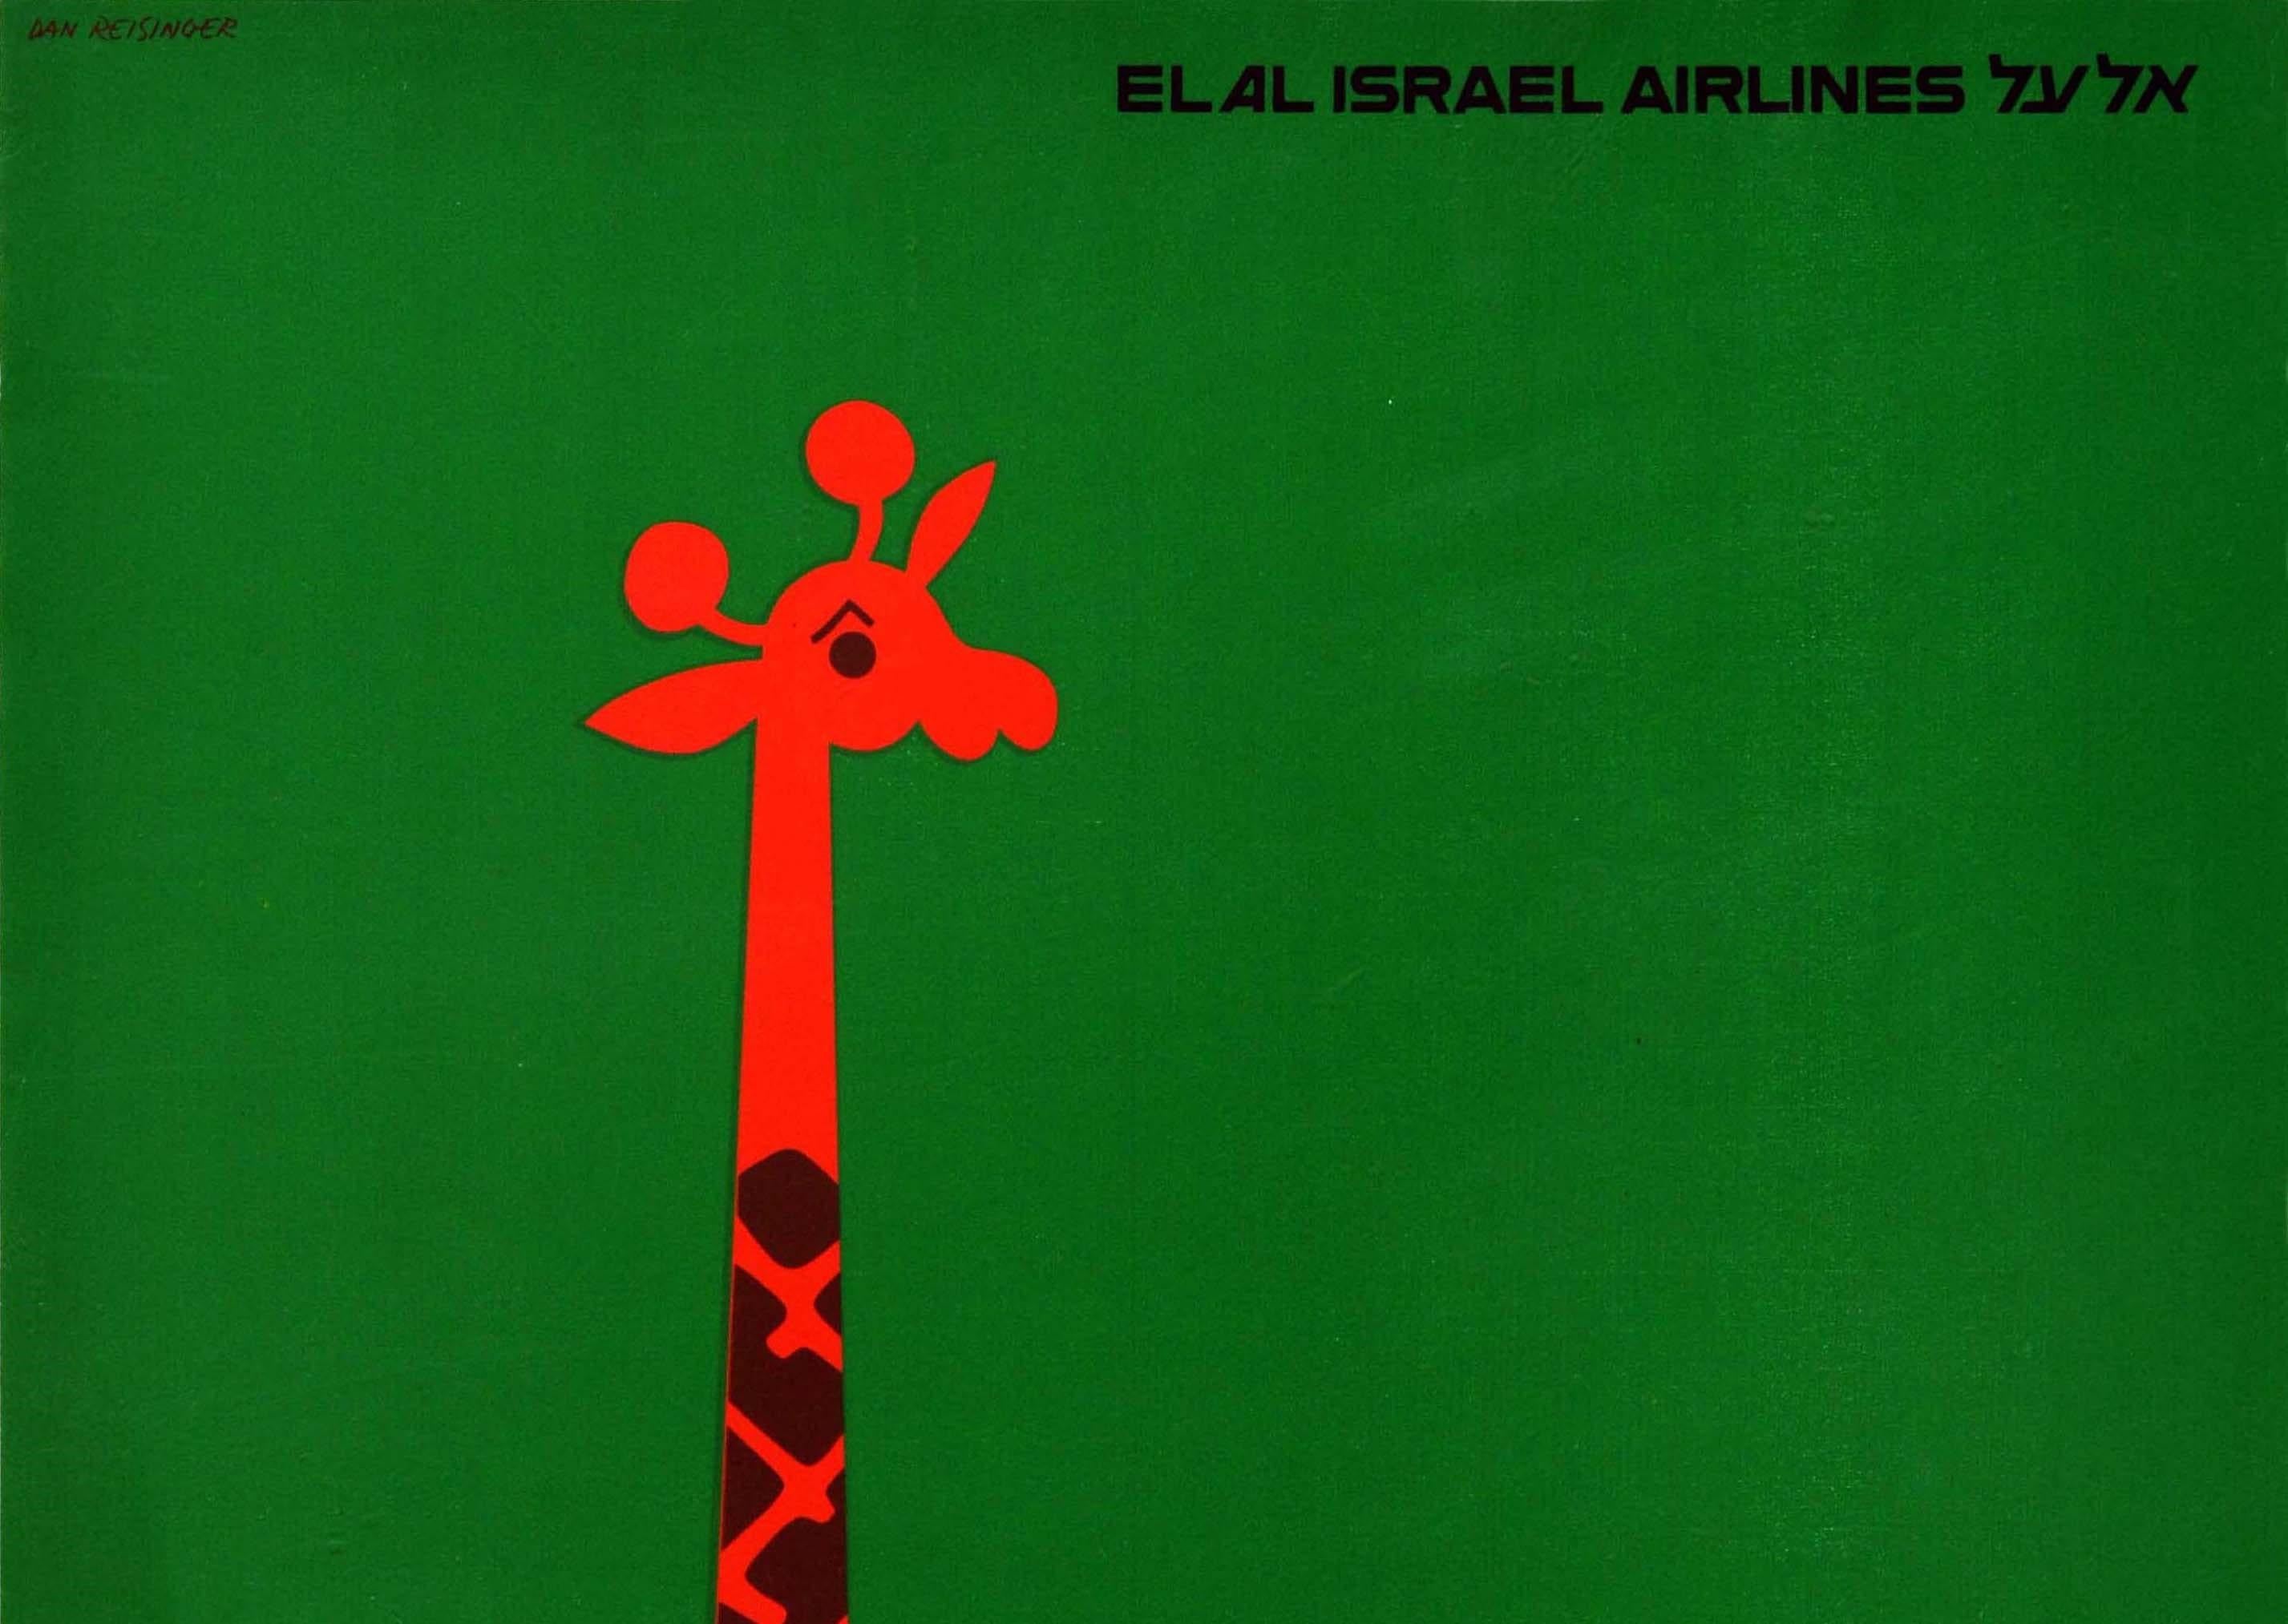 Original vintage travel poster issued by El Al Israel Airlines for Africa featuring a great graphic design by the notable Israeli artist Dan Reisinger (1934-2019) depicting the bold white lettering of El Al with a giraffe as the first L against a